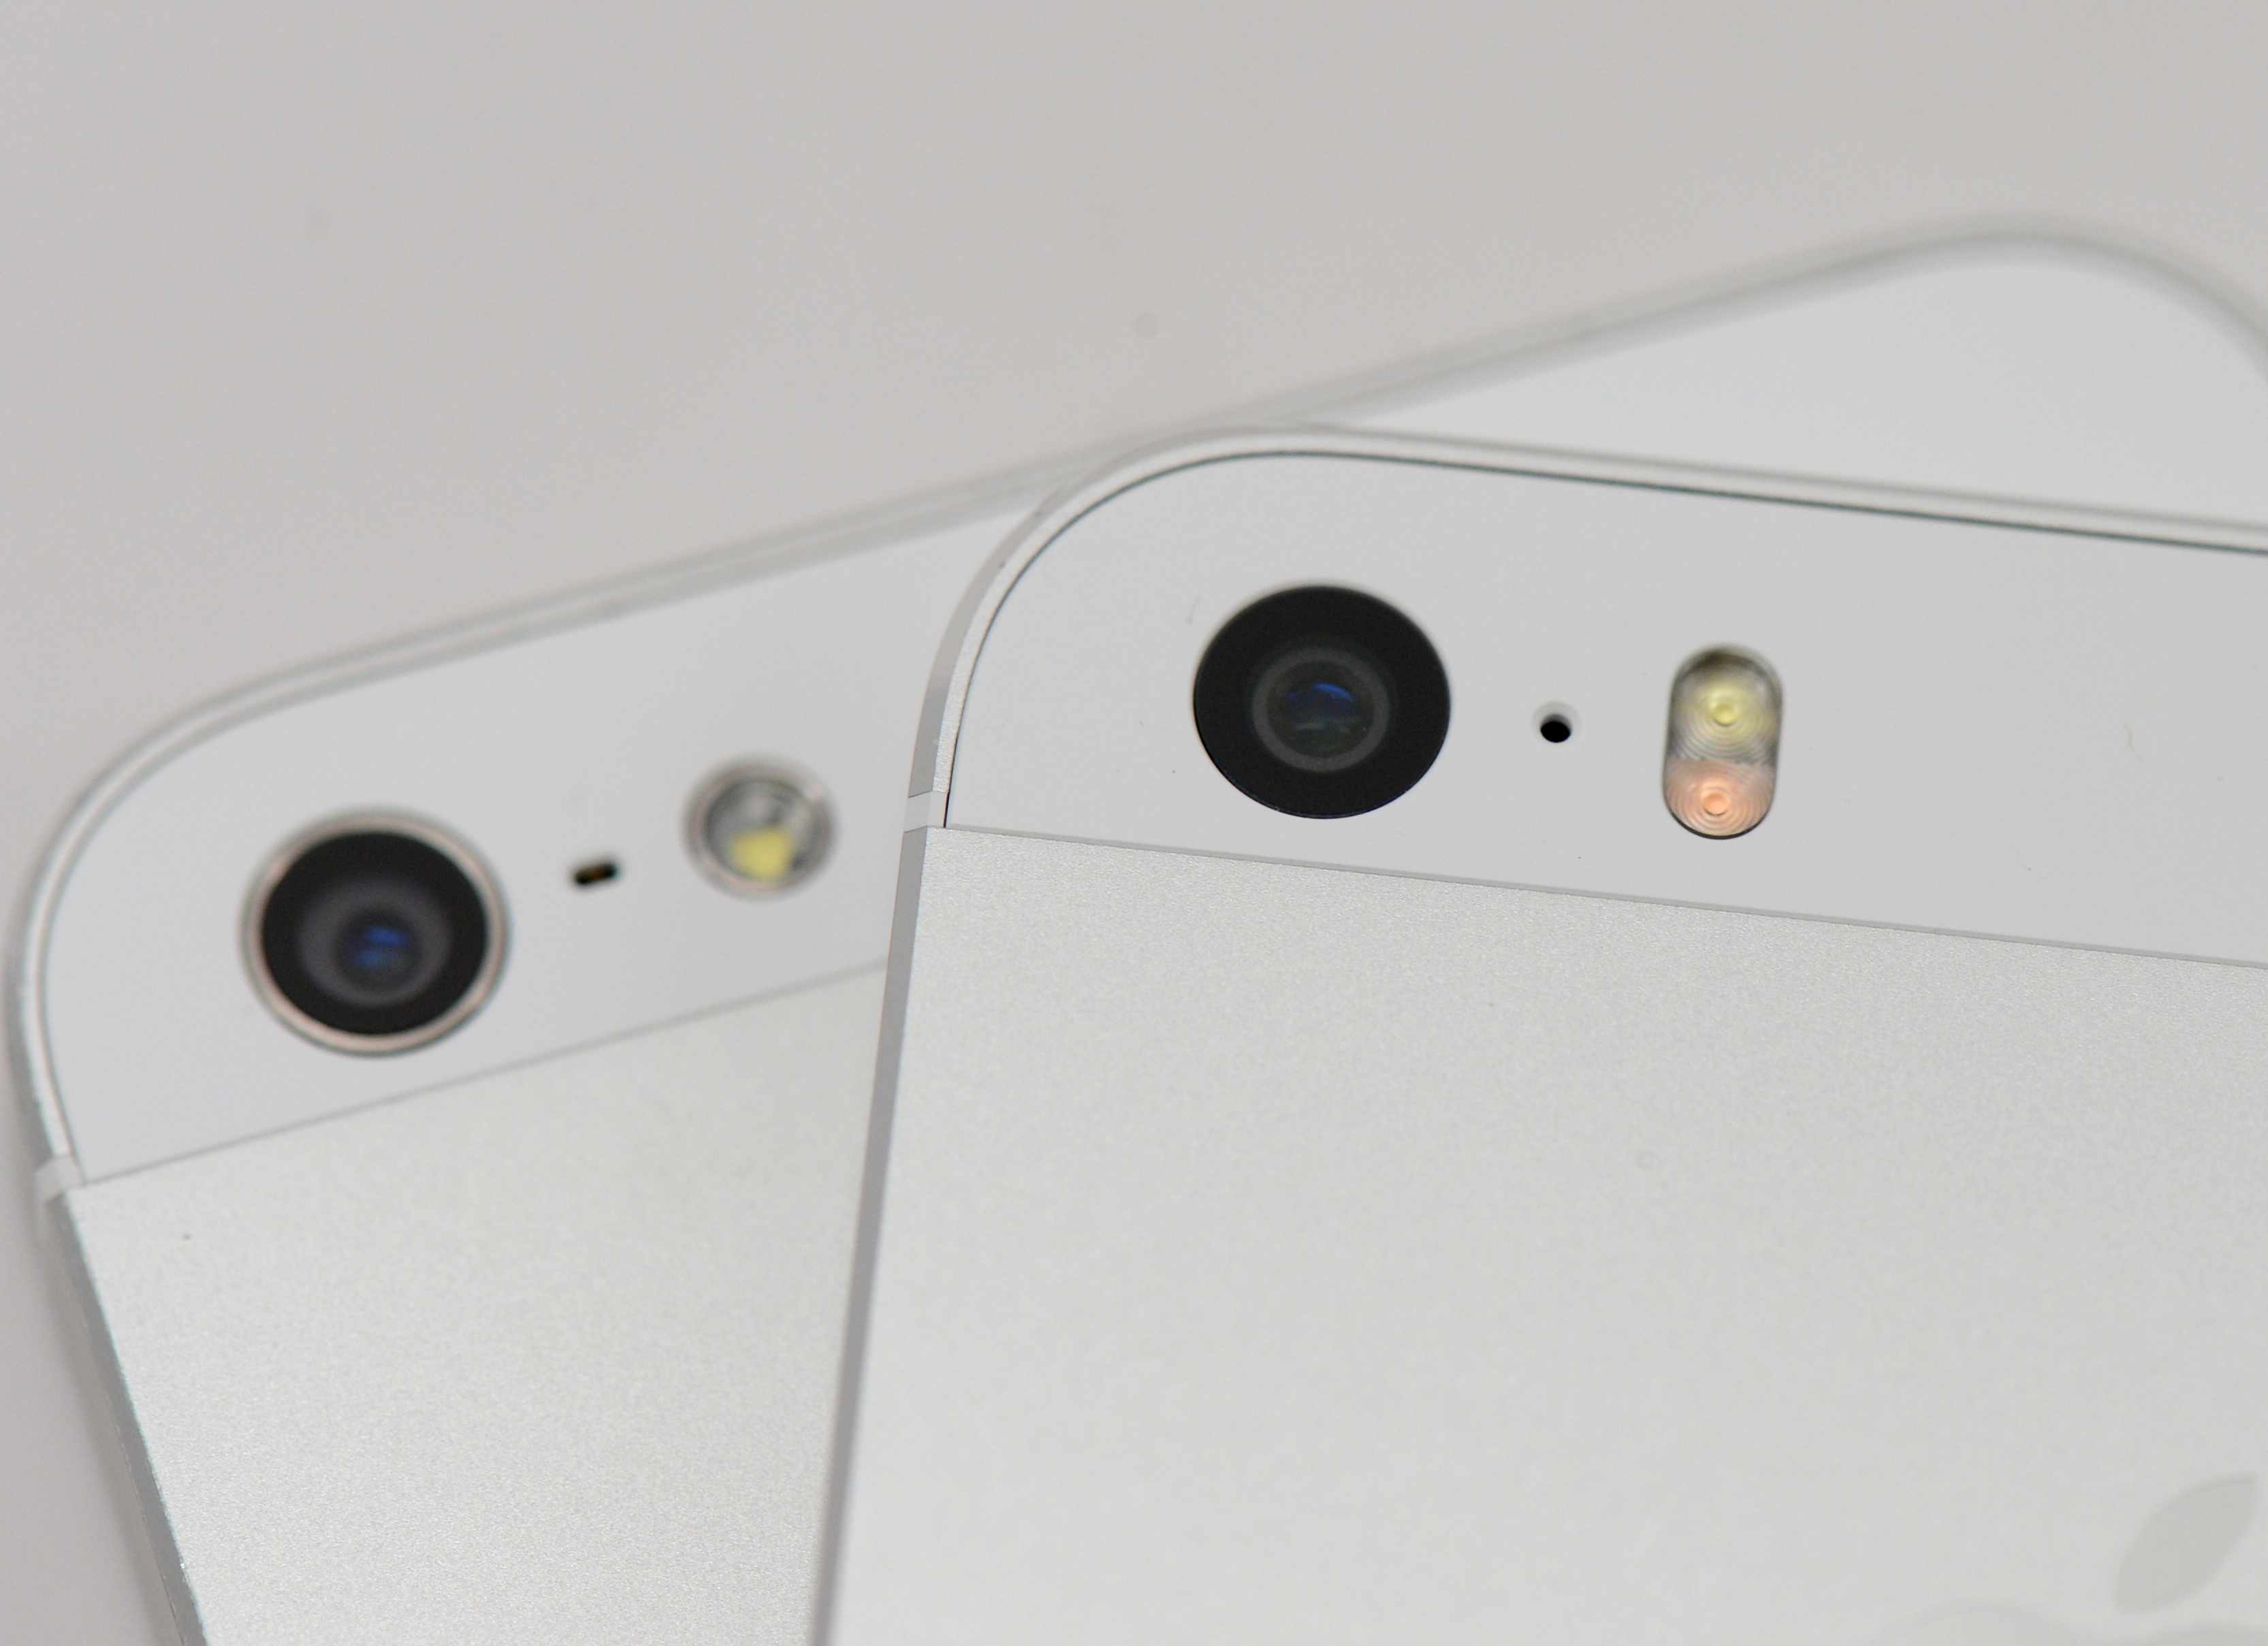 The latest Apple iPhone 6 rumors suggest an improved camera with a f1.8 aperture.